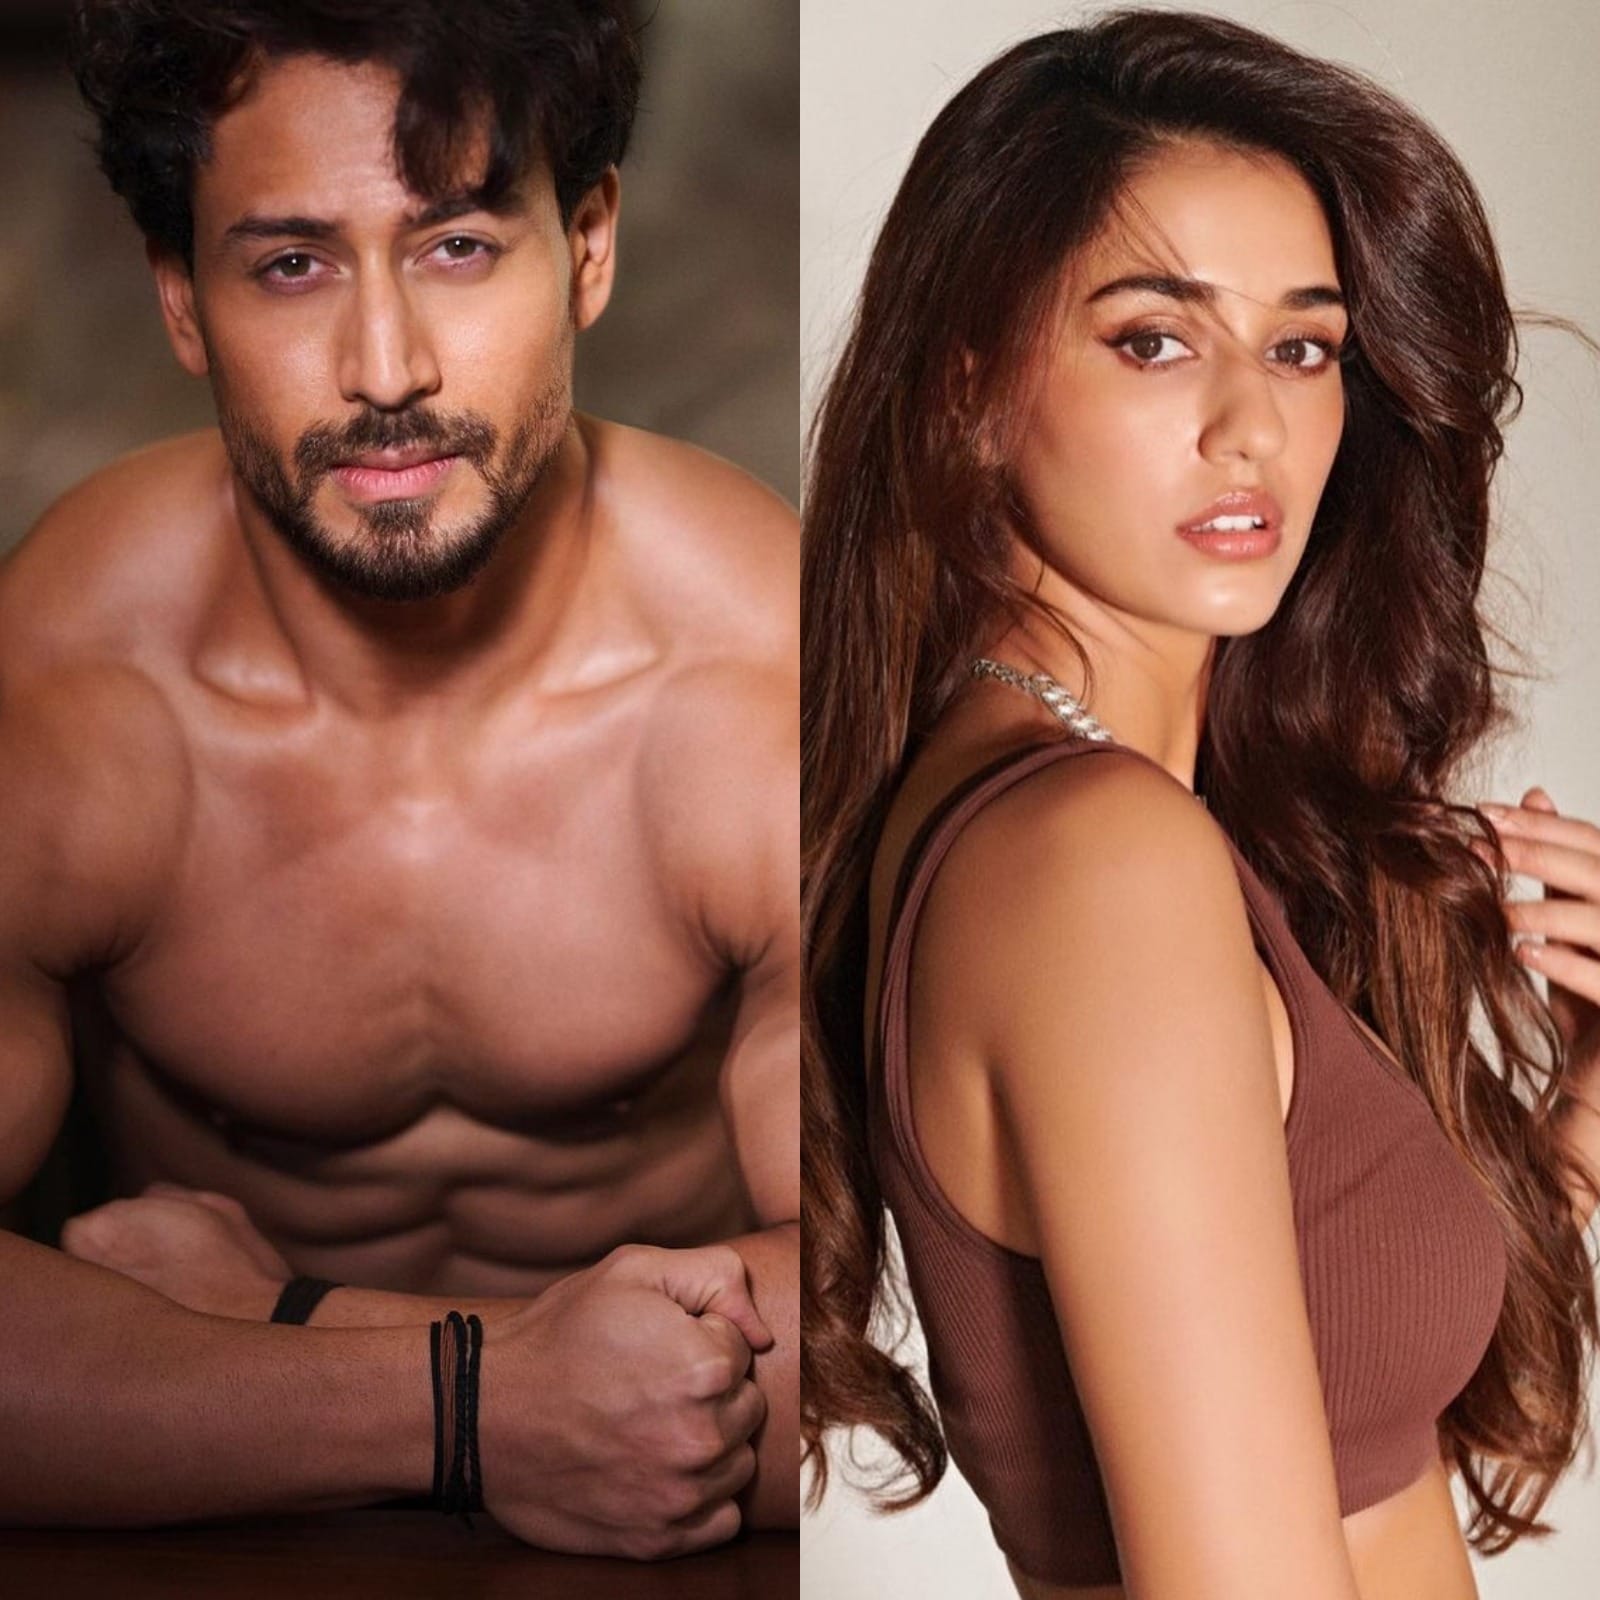 Disha Patani And Tiger Shroff X X X - Tiger Shroff Shares BTS Video Featuring 'Neck Bursting, Back Breaking'  Action Sequence; Disha Patani Says 'Crazy You Are' - News18